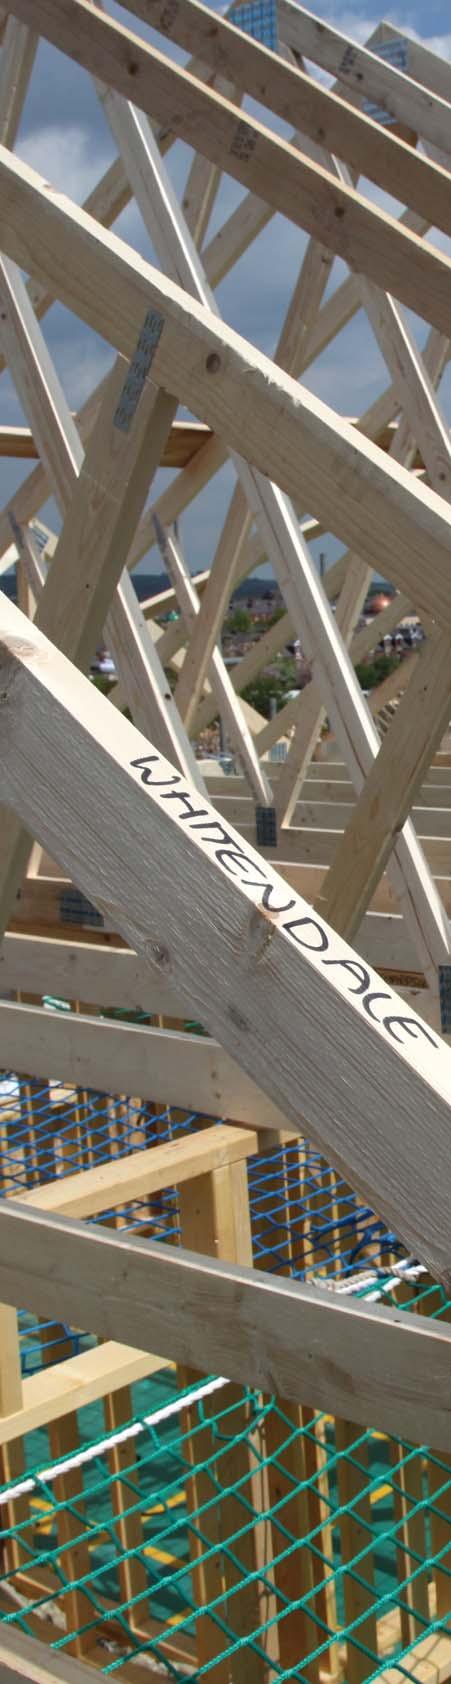 TRUSSED RAFTERS QUALITY YOU CAN RELY ON TRUSSED RAFTERS Now considered part of traditional constructional technology, Howarth Timber Engineered Solutions has been manufacturing trussed rafters for